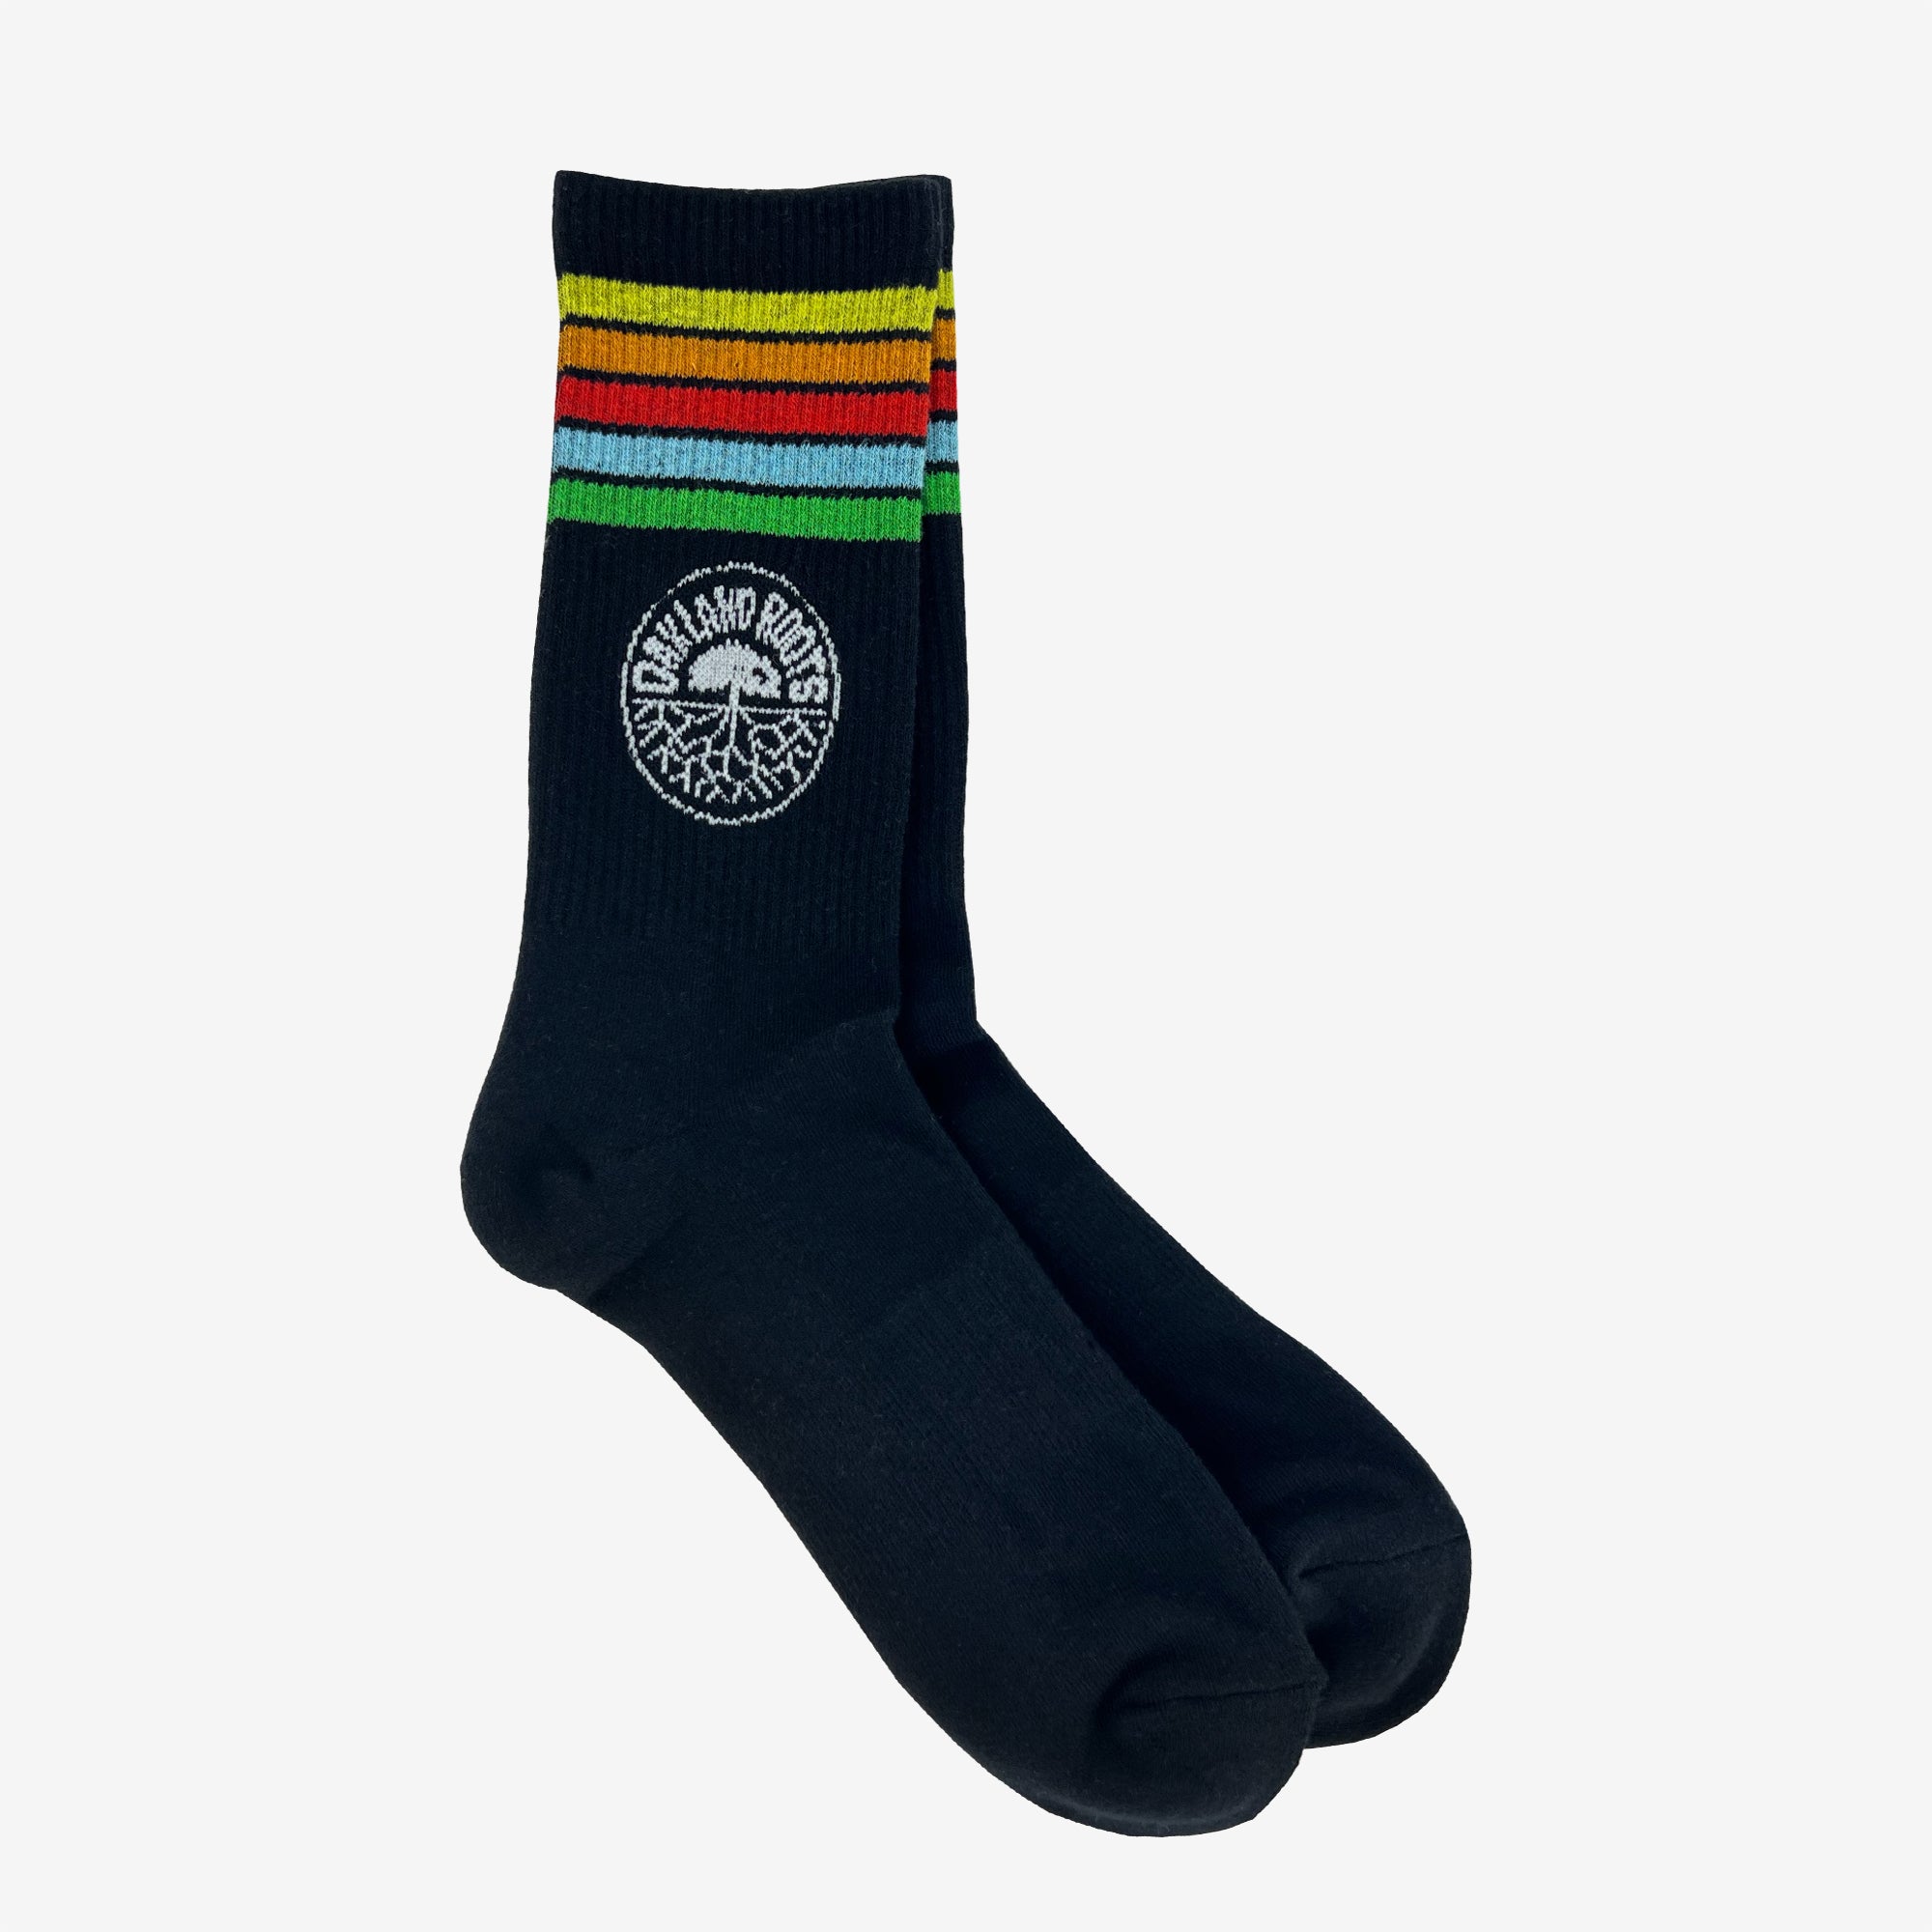 Two nestled black crew socks with Soccer Club colored stripes & logo on top sides.